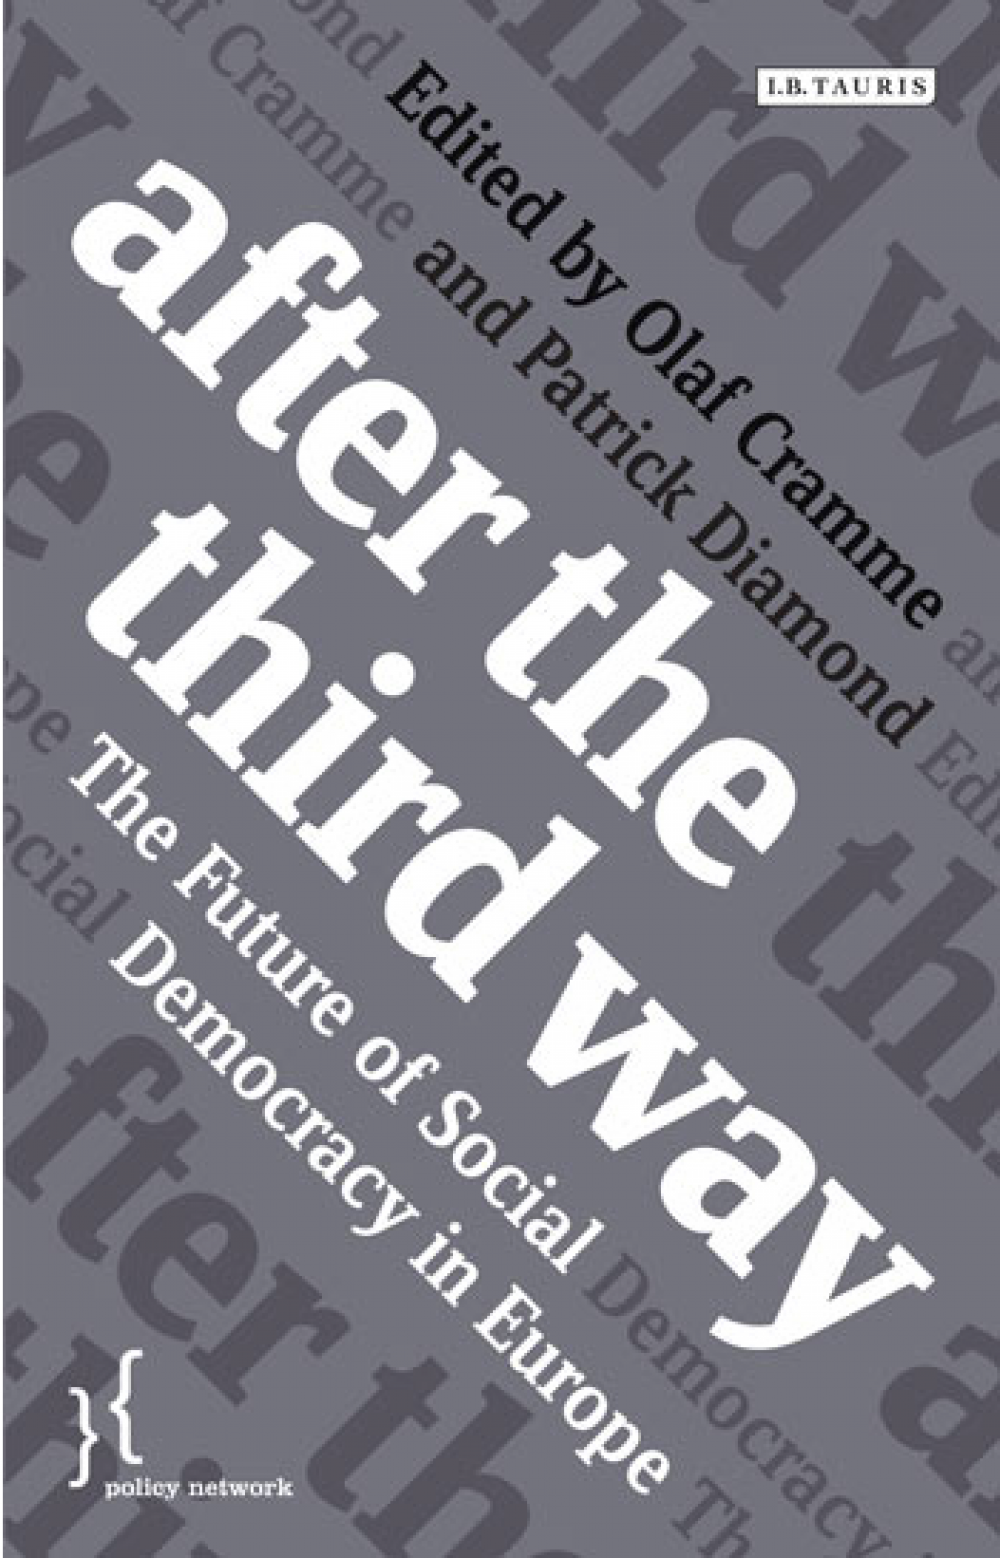 After the Third Way